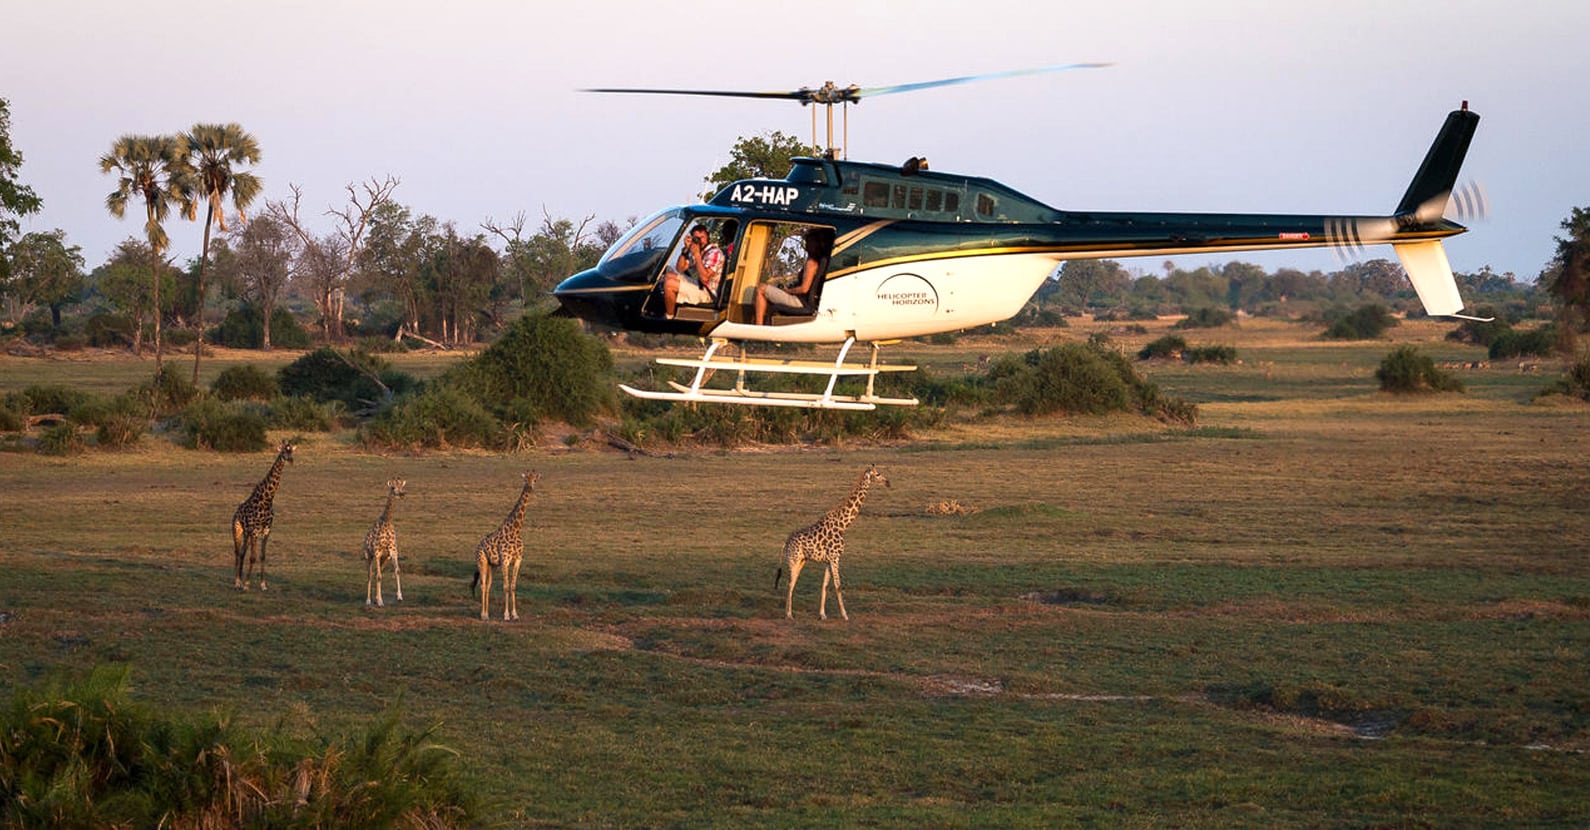 Flying past a herd of Giraffes by helicopter